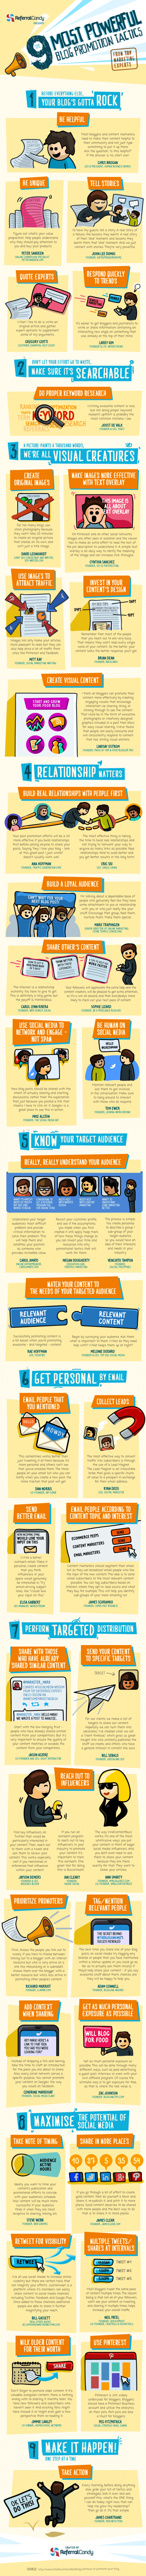 9 ways to promote your blog posts